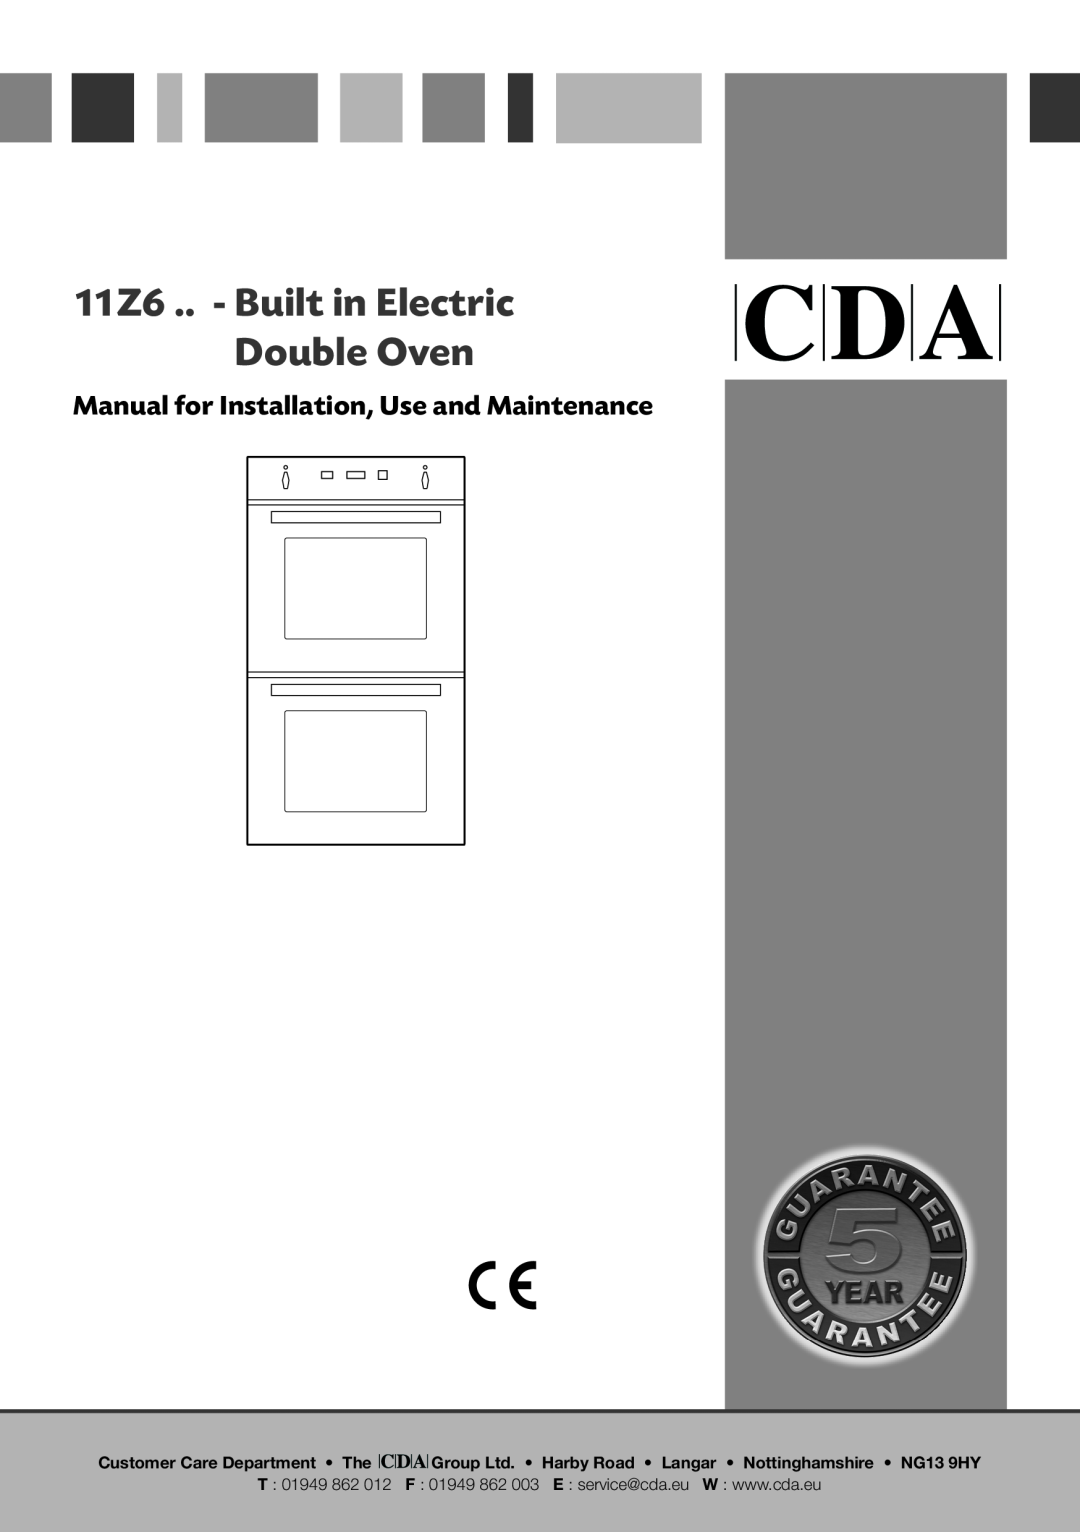 CDA manual 11Z6 .. - Built in Electric Double Oven, Manual for Installation, Use and Maintenance, T 